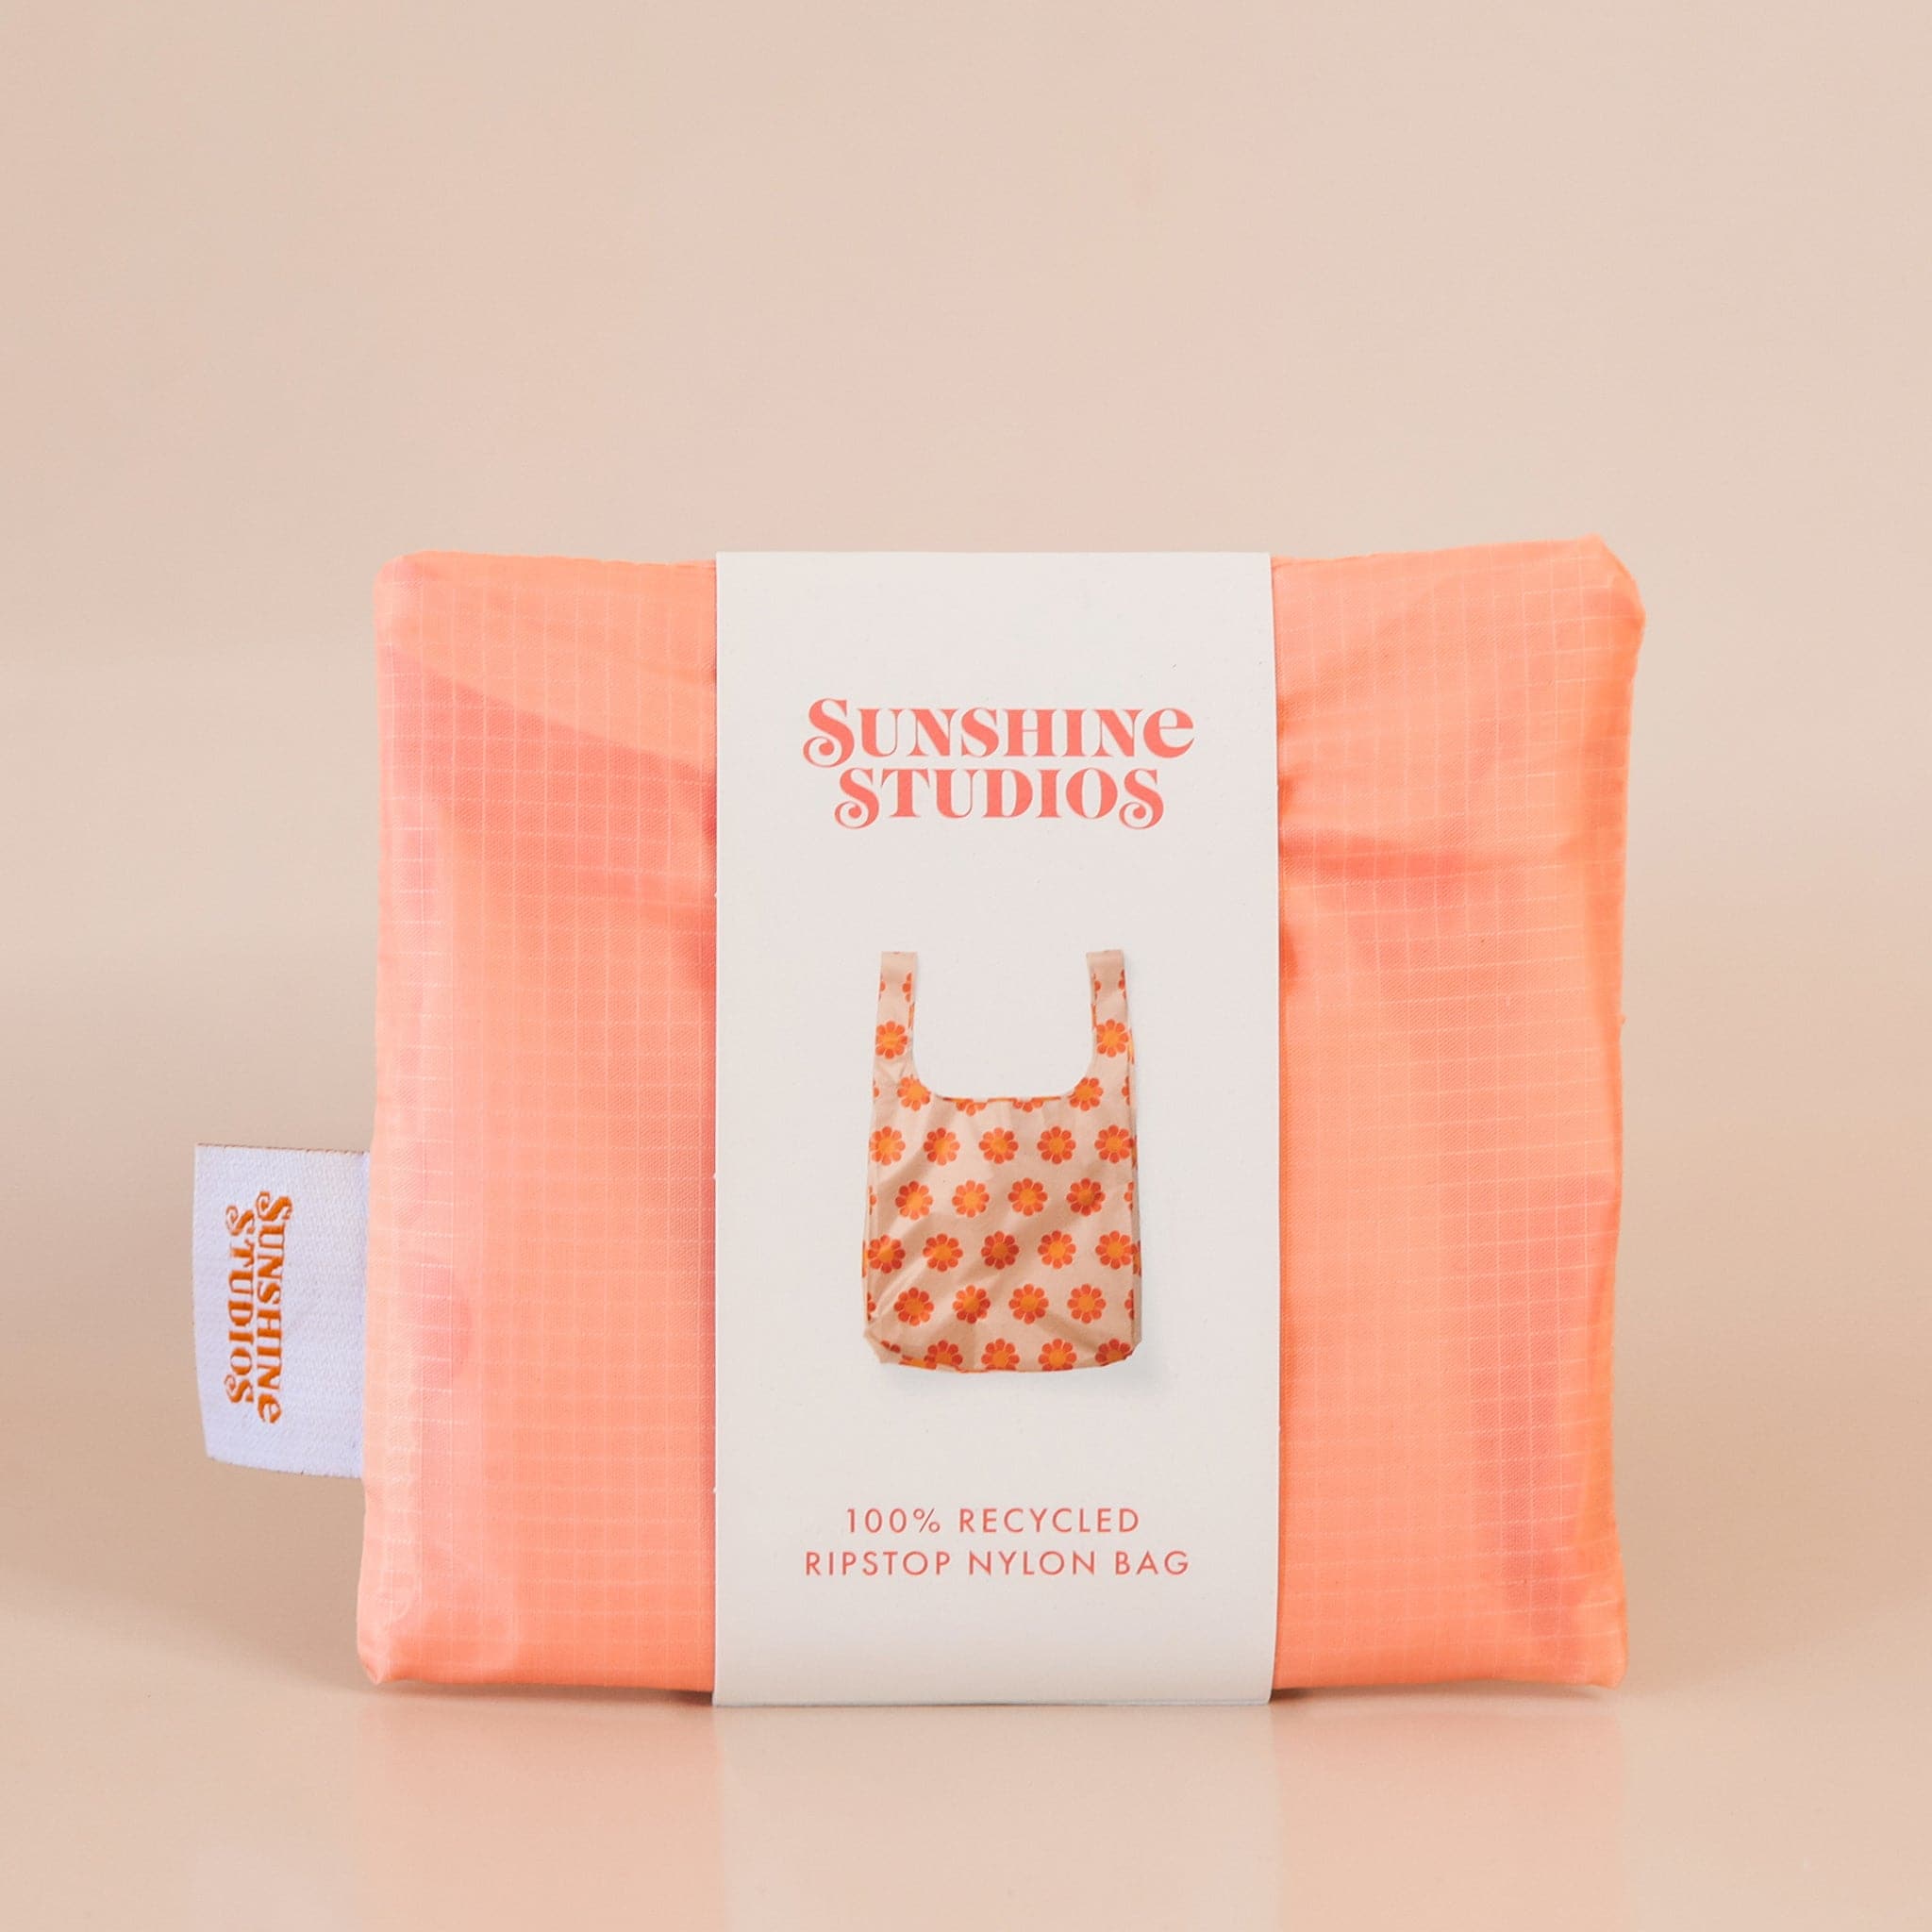 Peach reusable bag folded tightly into a square. The bag is wrapped in a white band that reads ’sunshine studios'. Under the text is a picture of the reusable bag. On the left side of the bag is a white tag with bright orange text that reads ’sunshine studios.' 